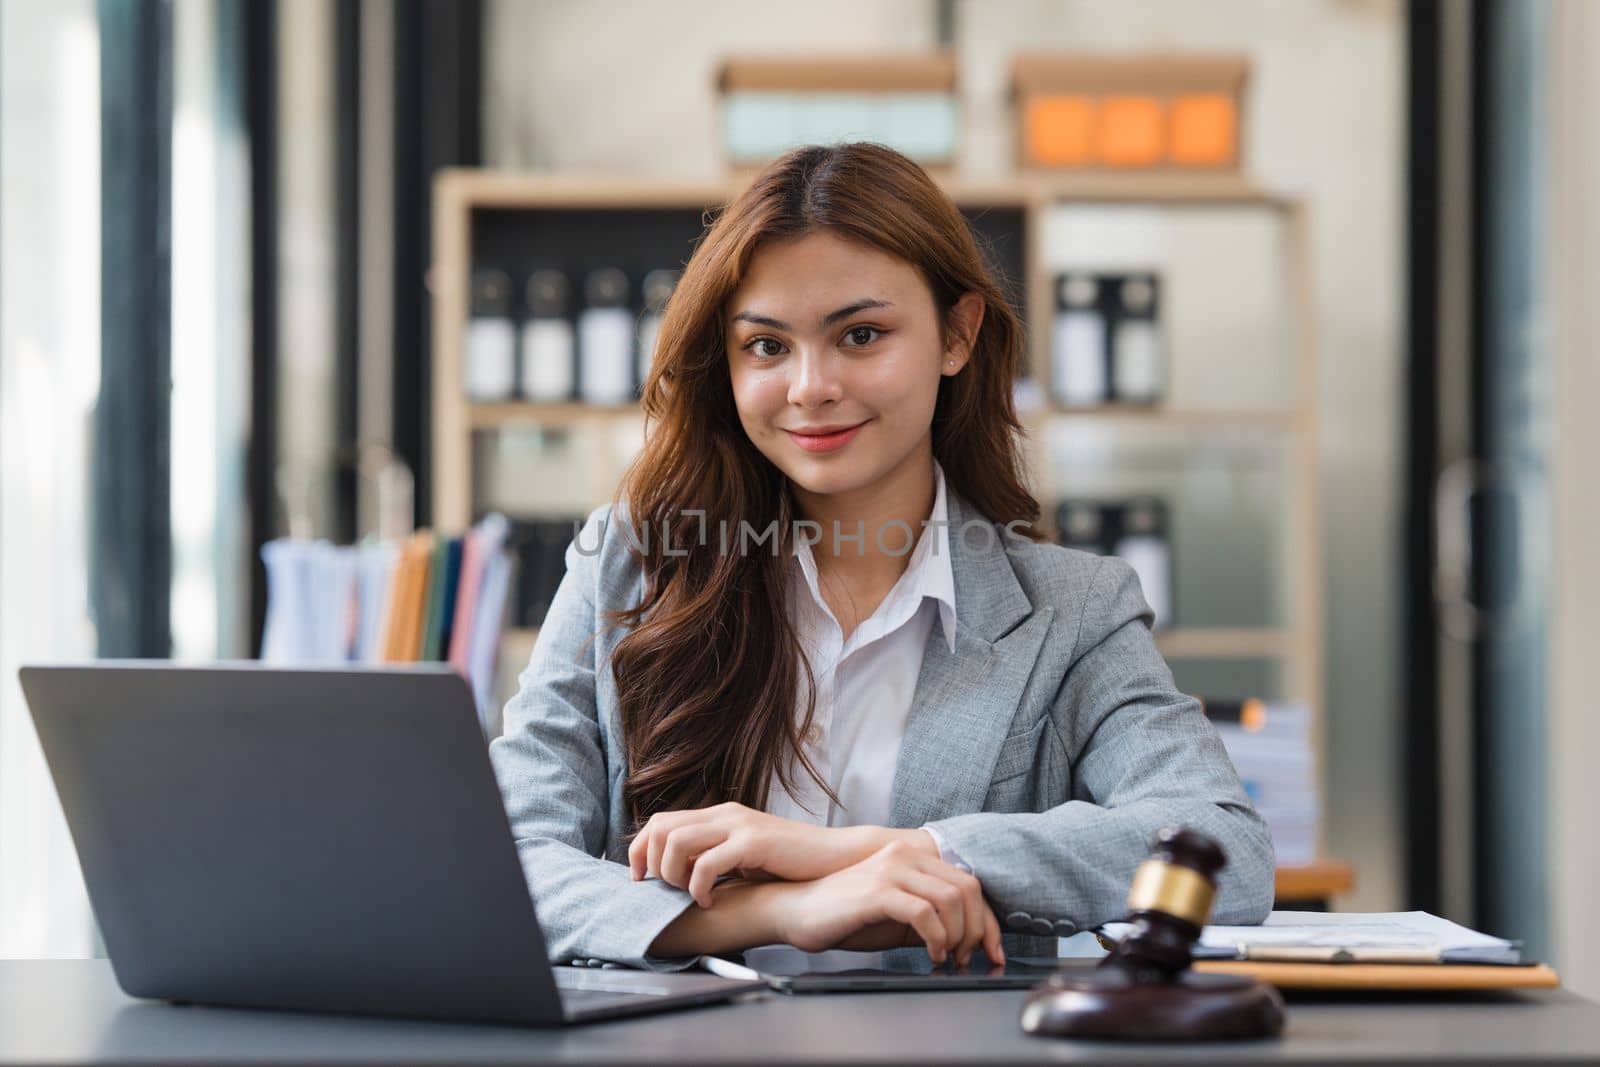 Business Lawyer consulting online on laptop while working at office